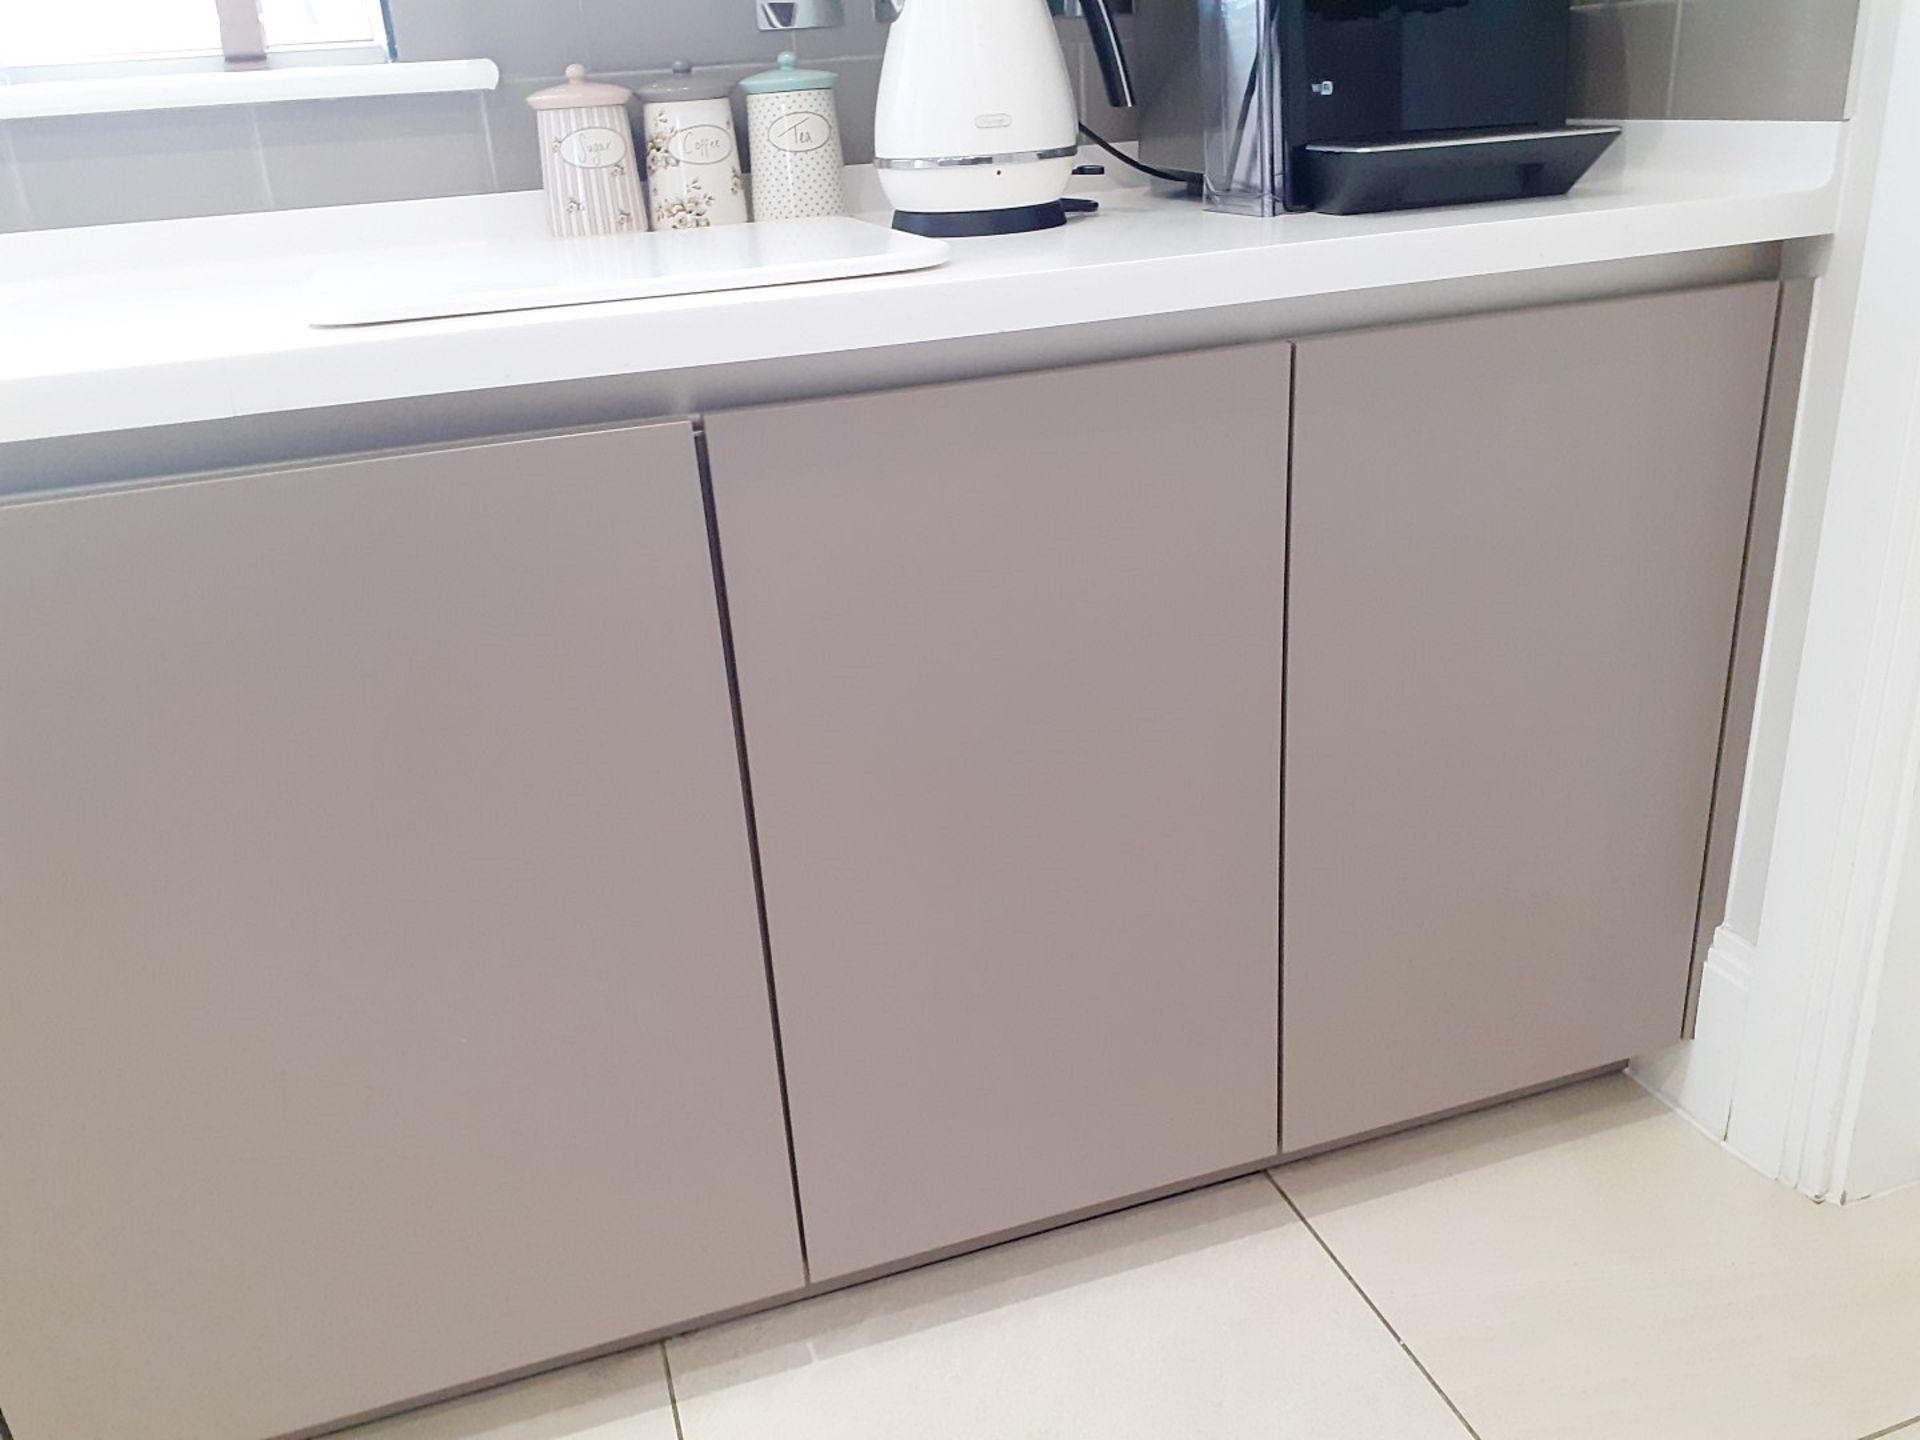 1 x SieMatic Handleless Fitted Kitchen With Intergrated NEFF Appliances, Corian Worktops And Island - Image 59 of 92